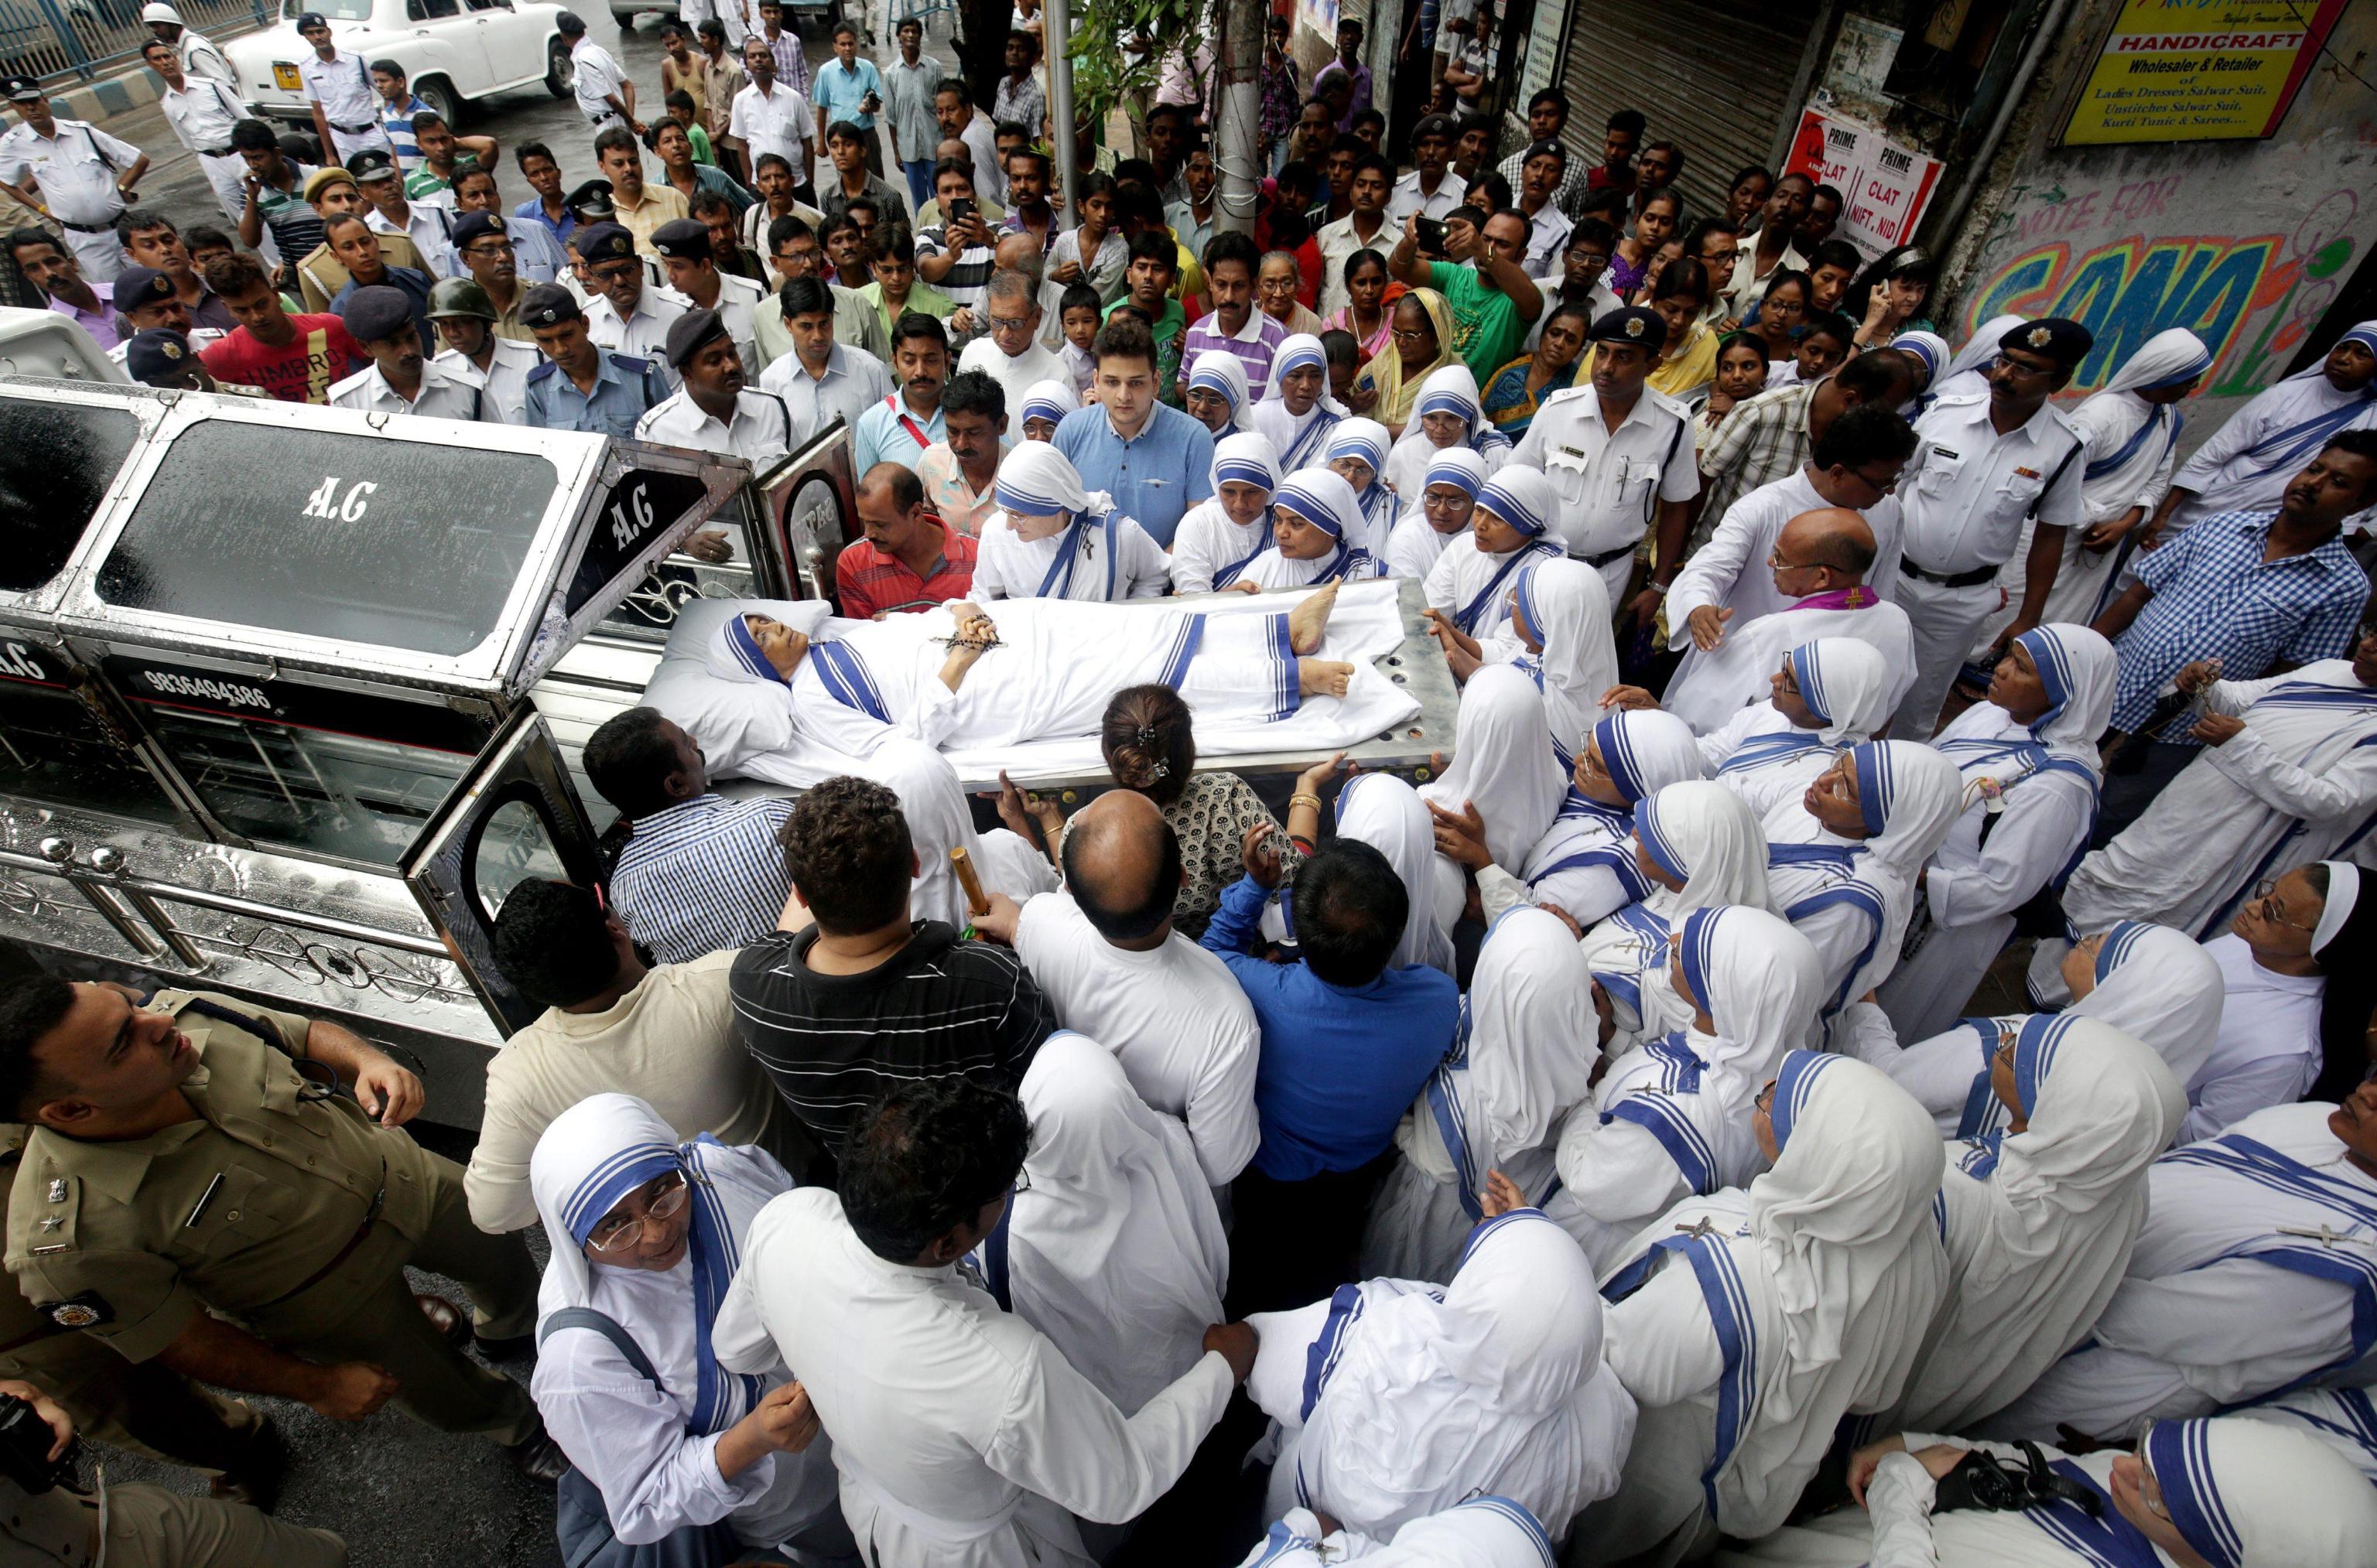 Nuns carry the body of Sister Nirmala outside Mother House during preparations for the funeral in Calcutta